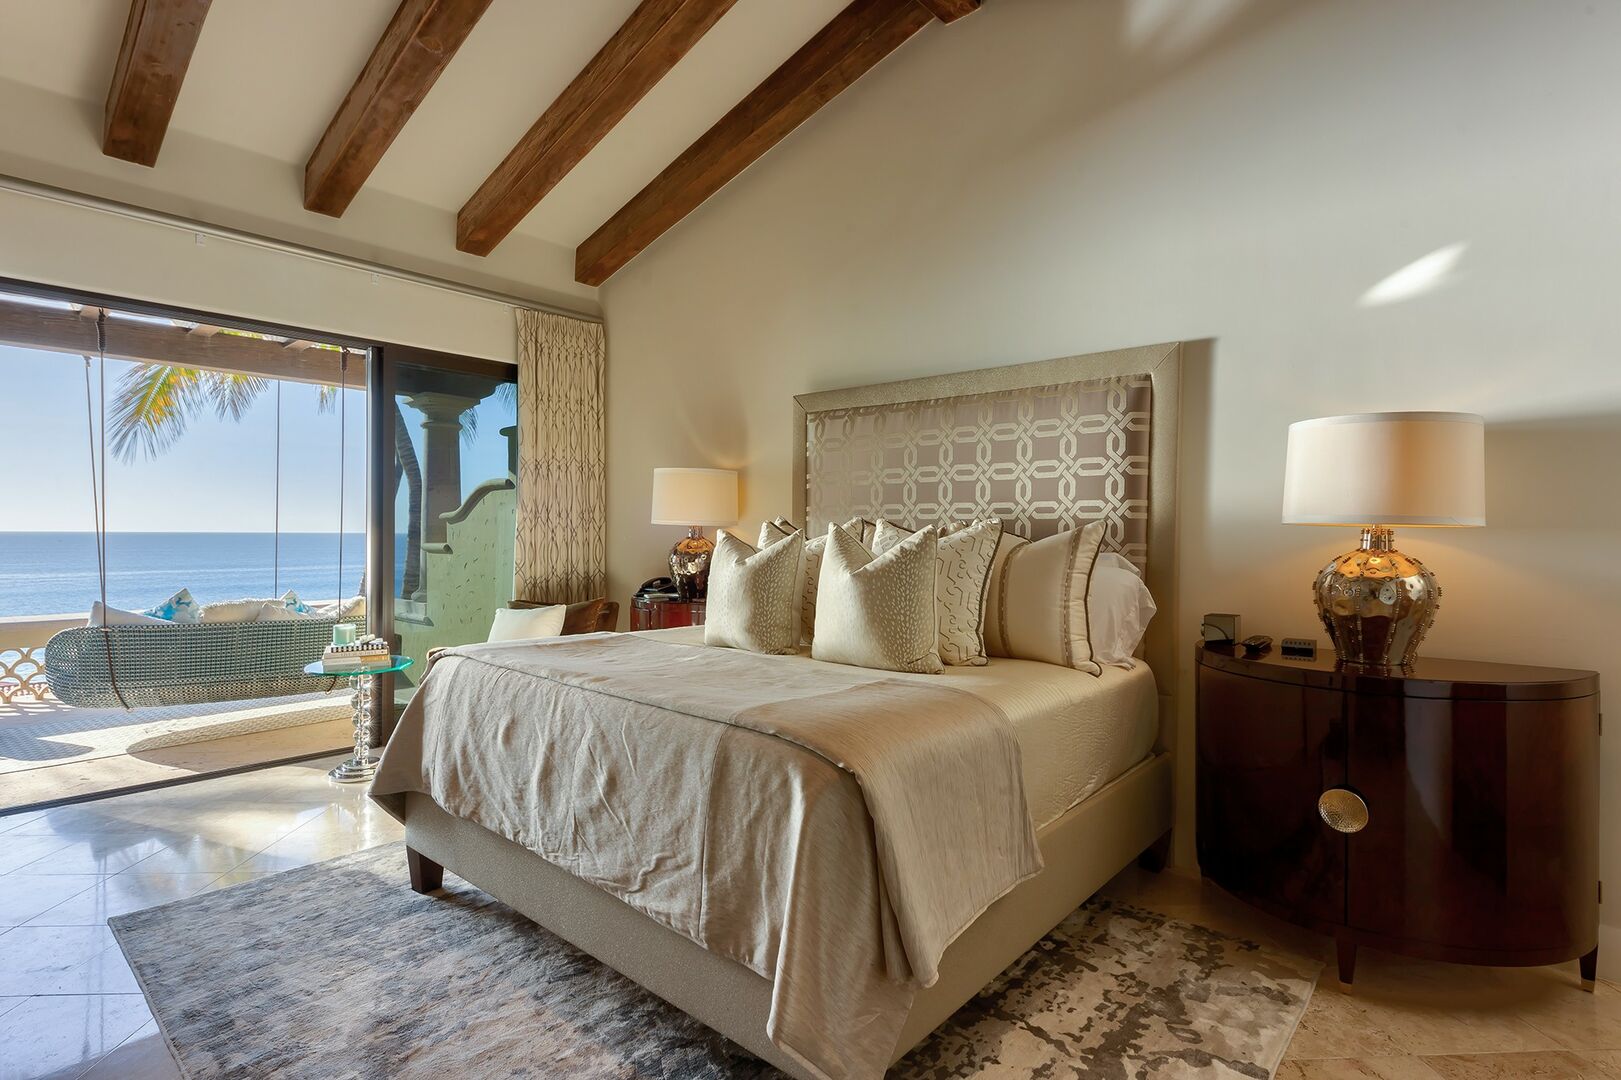 Exposed wood beams on the ceiling of bedroom number 2 with a view of the ocean from the balcony.